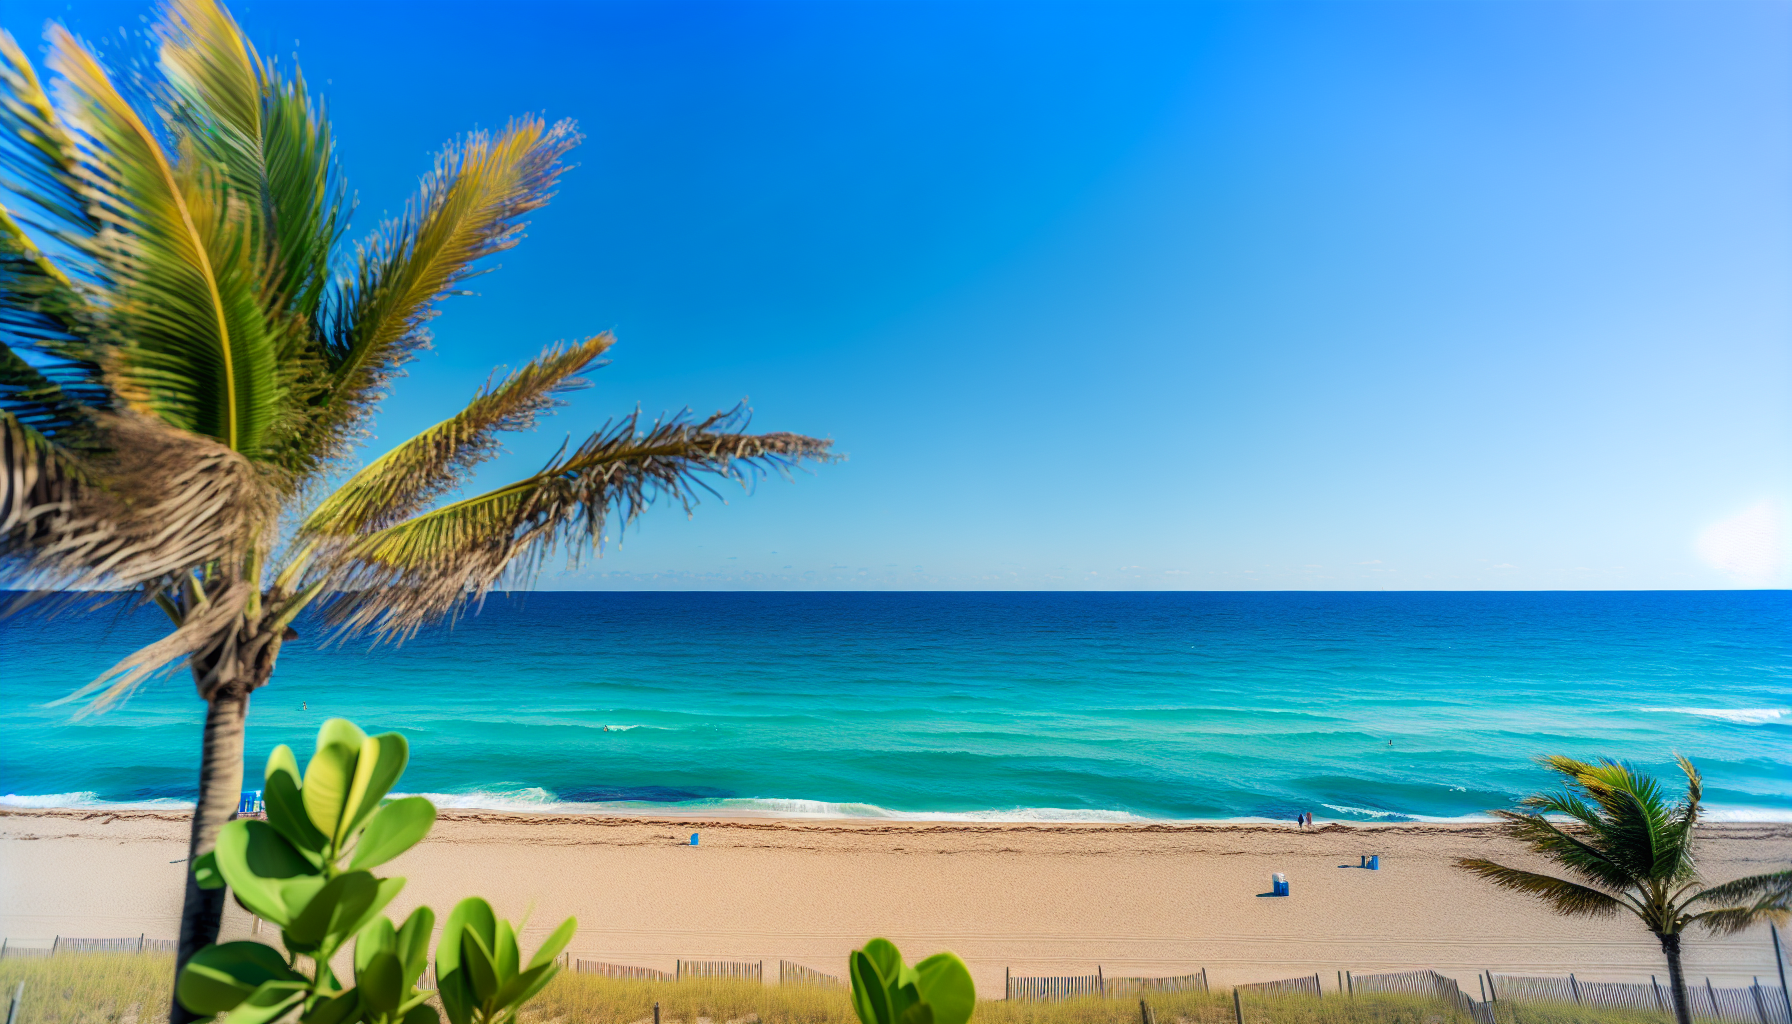 View of Fort Lauderdale beach with palm trees and ocean